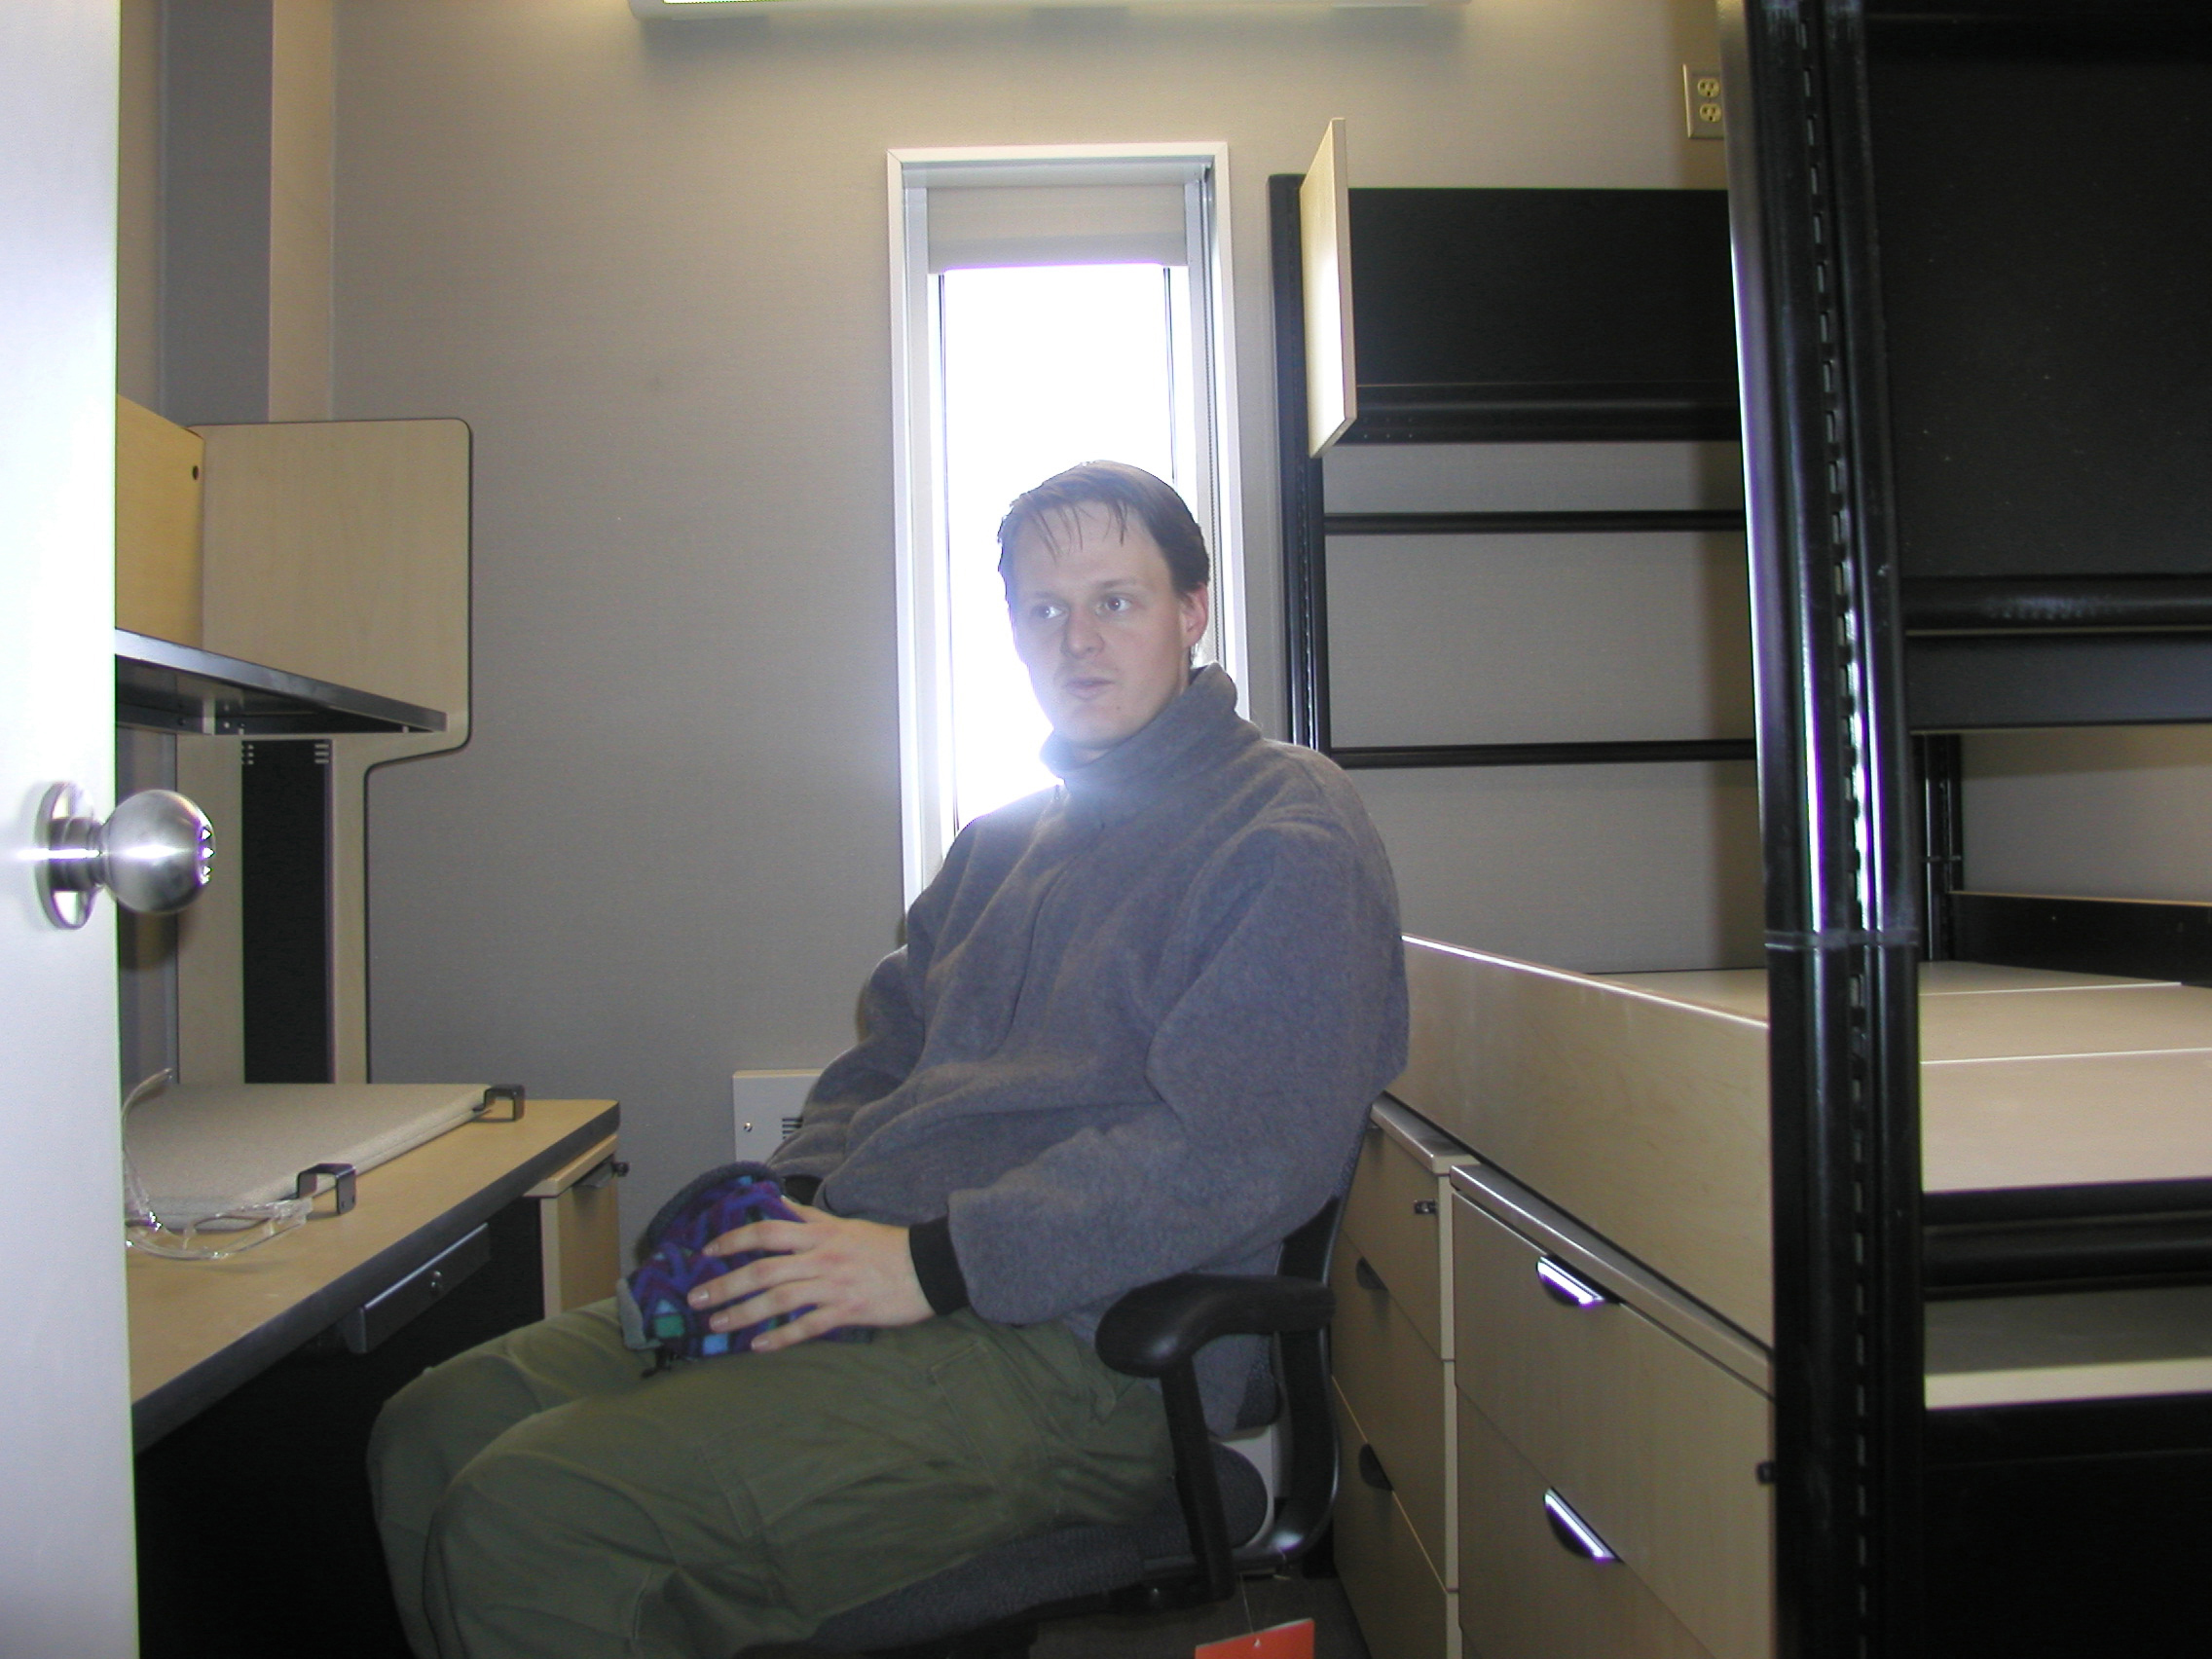 A man sits in a dorm room.